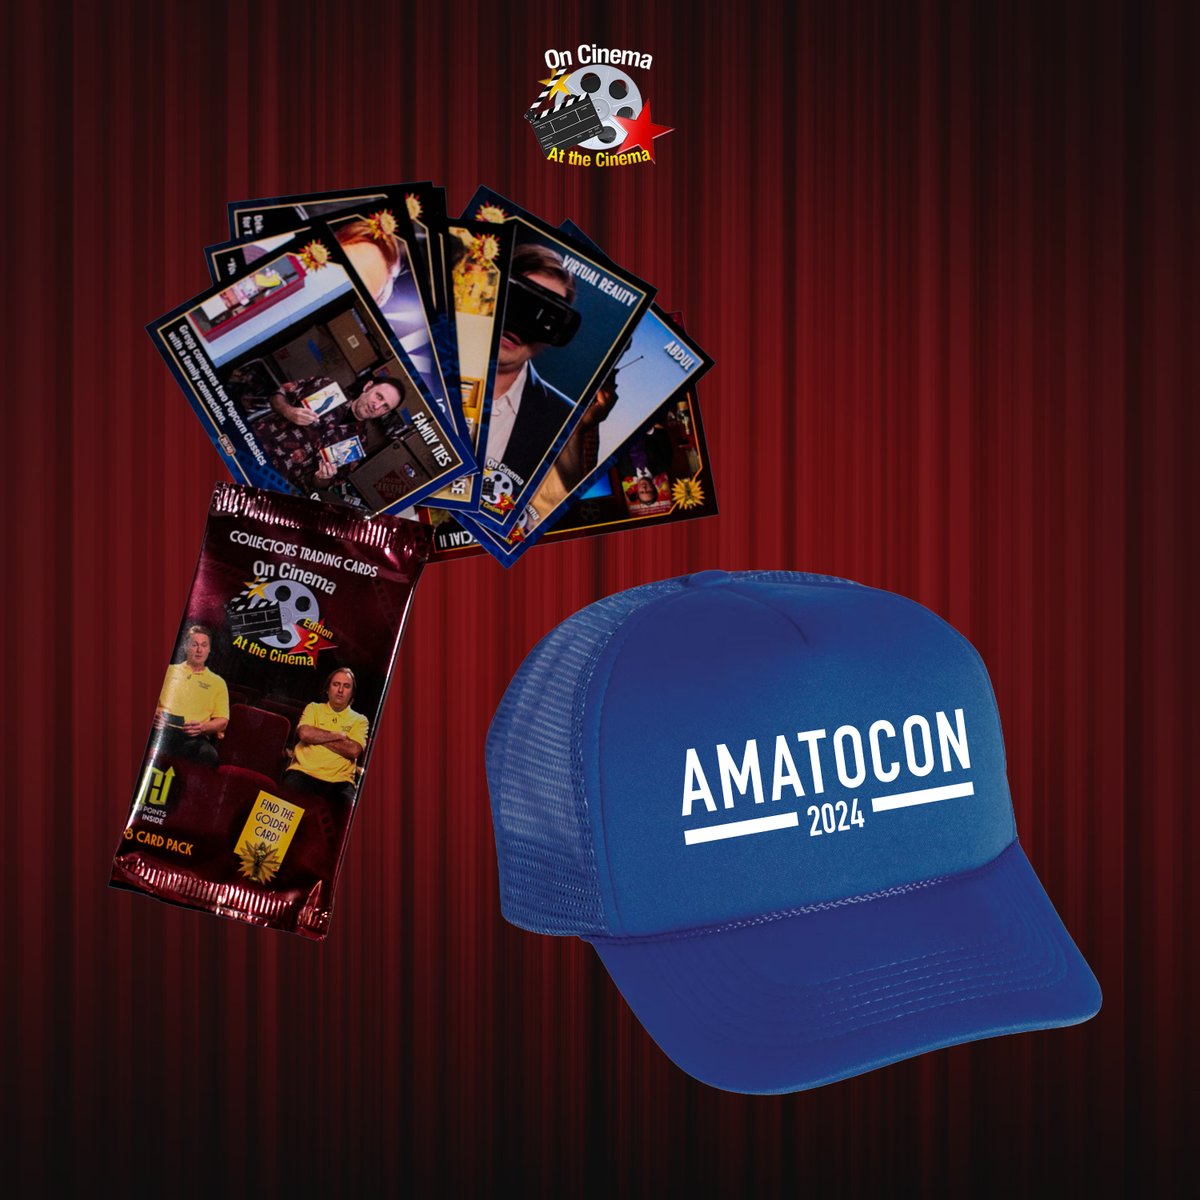 On Cinema Store update🍿 Edition 2 Trading Cards, AmatoCon Truckers, and a small batch of Deck of Cards (2022) VHS have been stocked! oncinema.merchtable.com